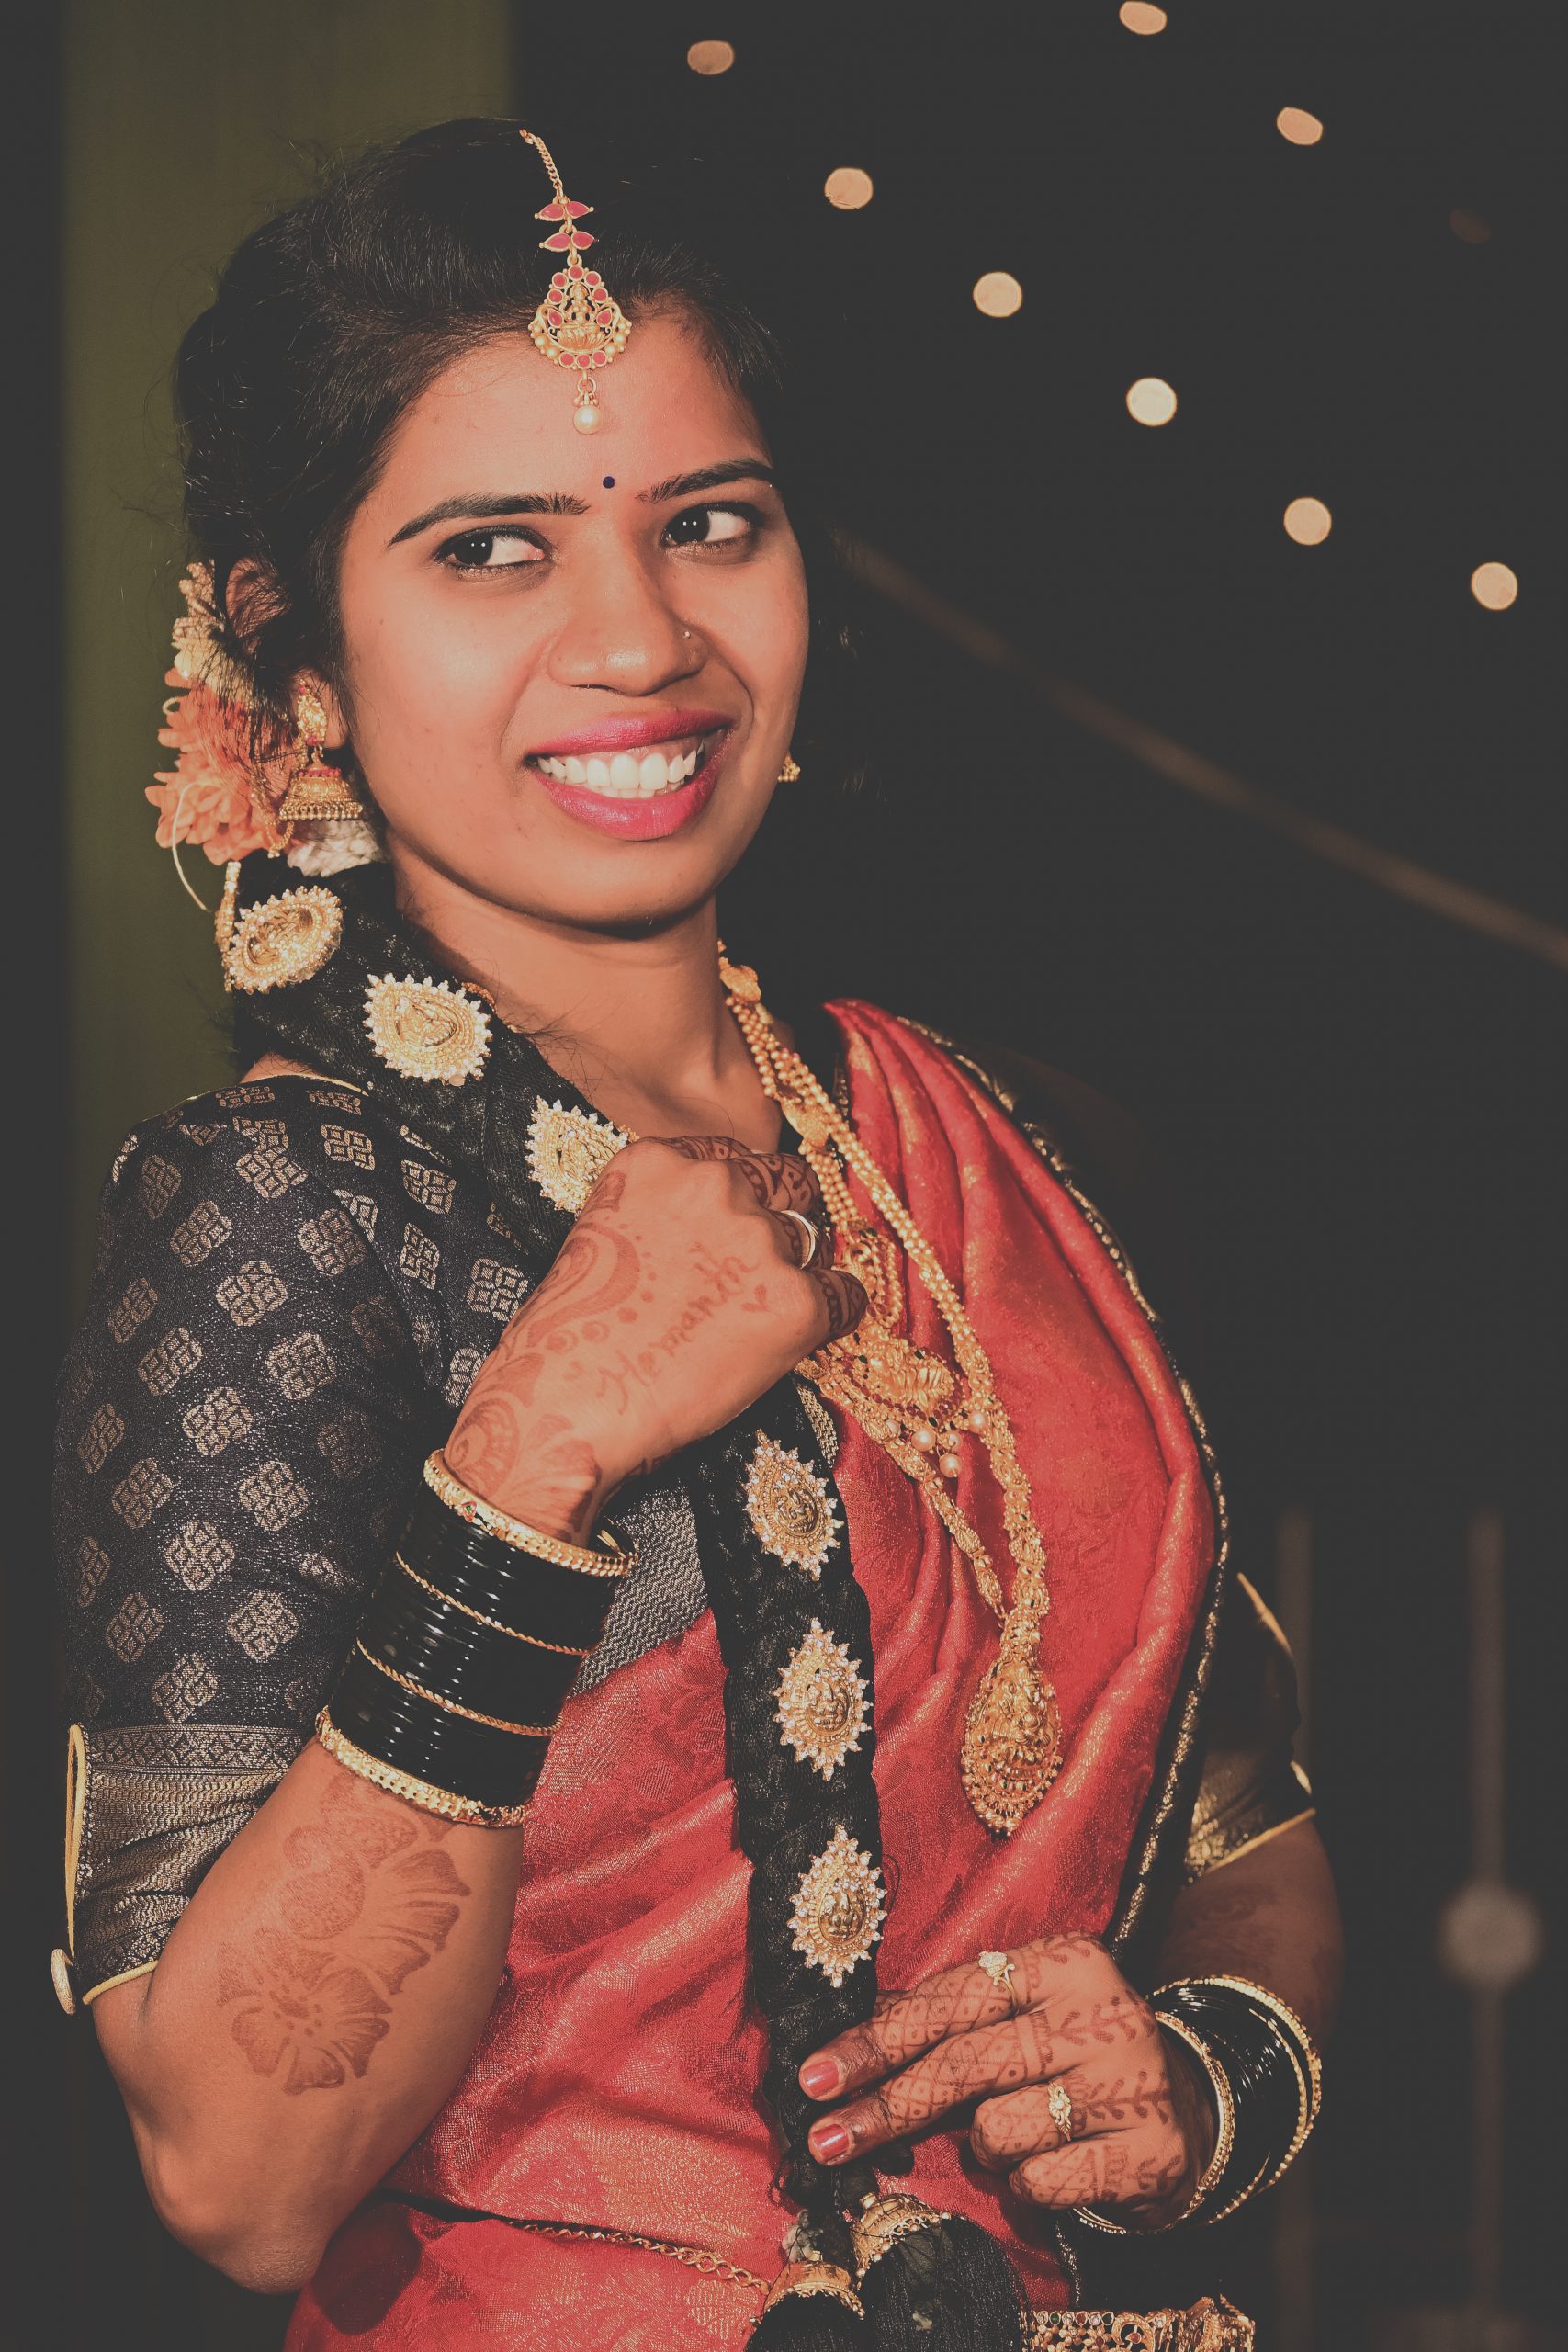 A happy Indian woman